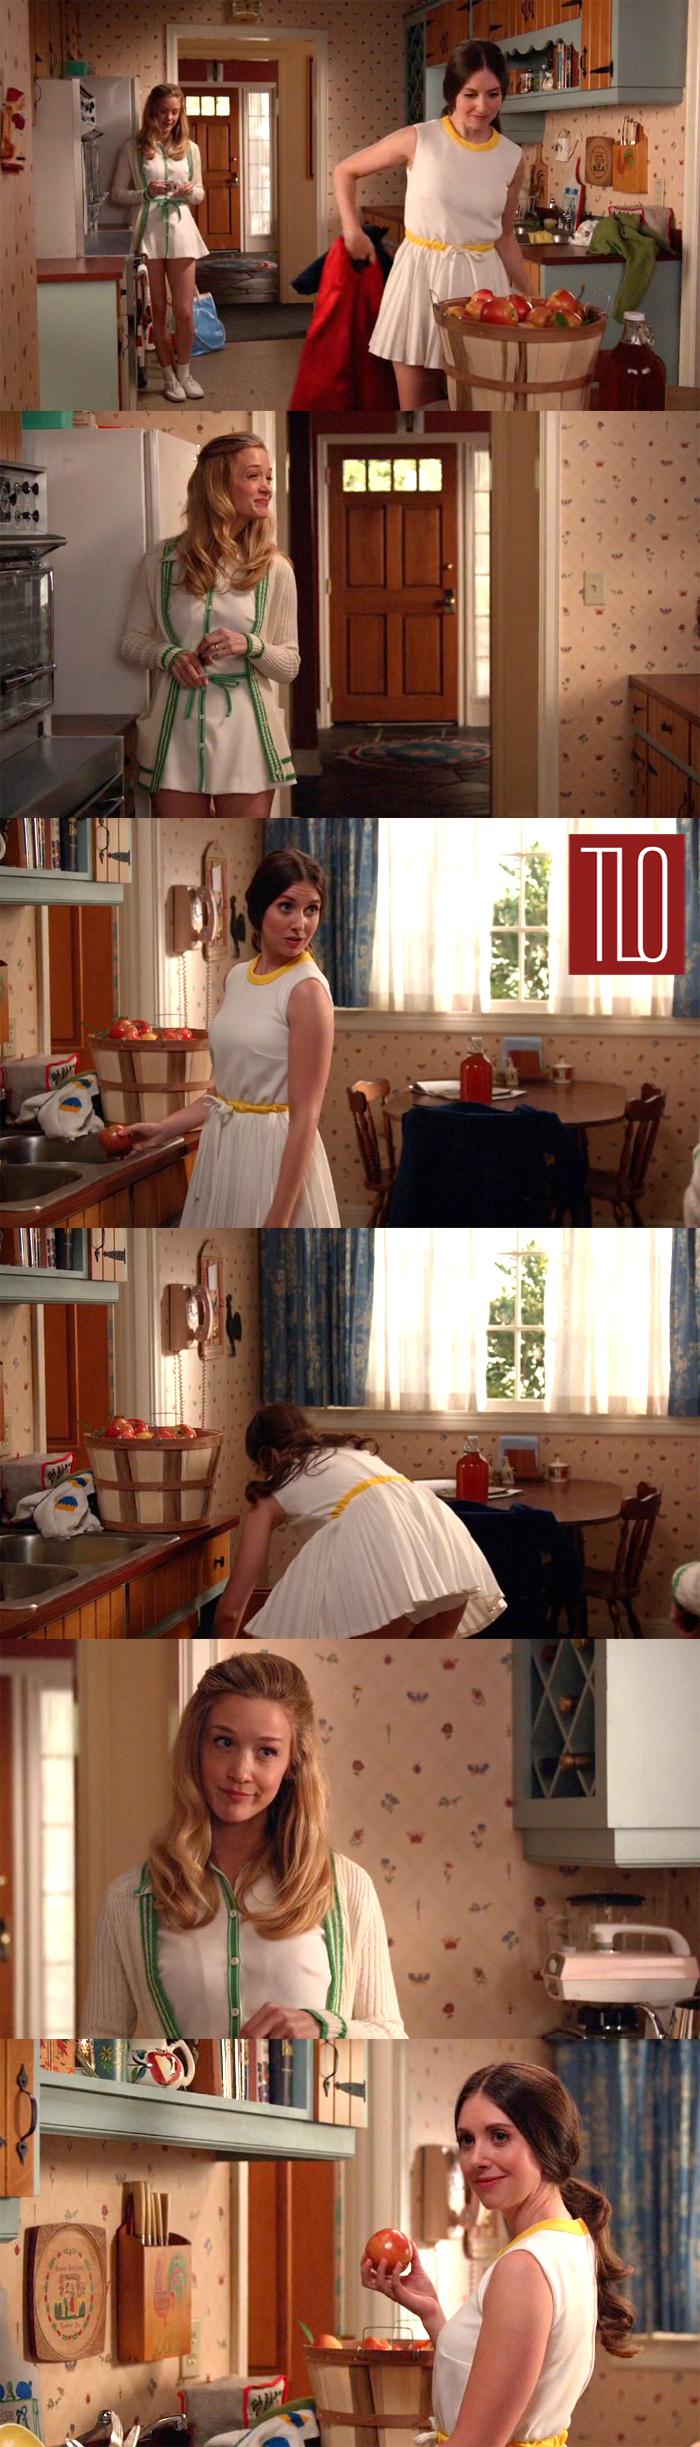 Mad-Men-Mad-Style-The-Milk-And-Honey-Route-Season-7-Episode-13-Television-Review-Costumes-Tom-Lorenzo-Site-TLO (2)